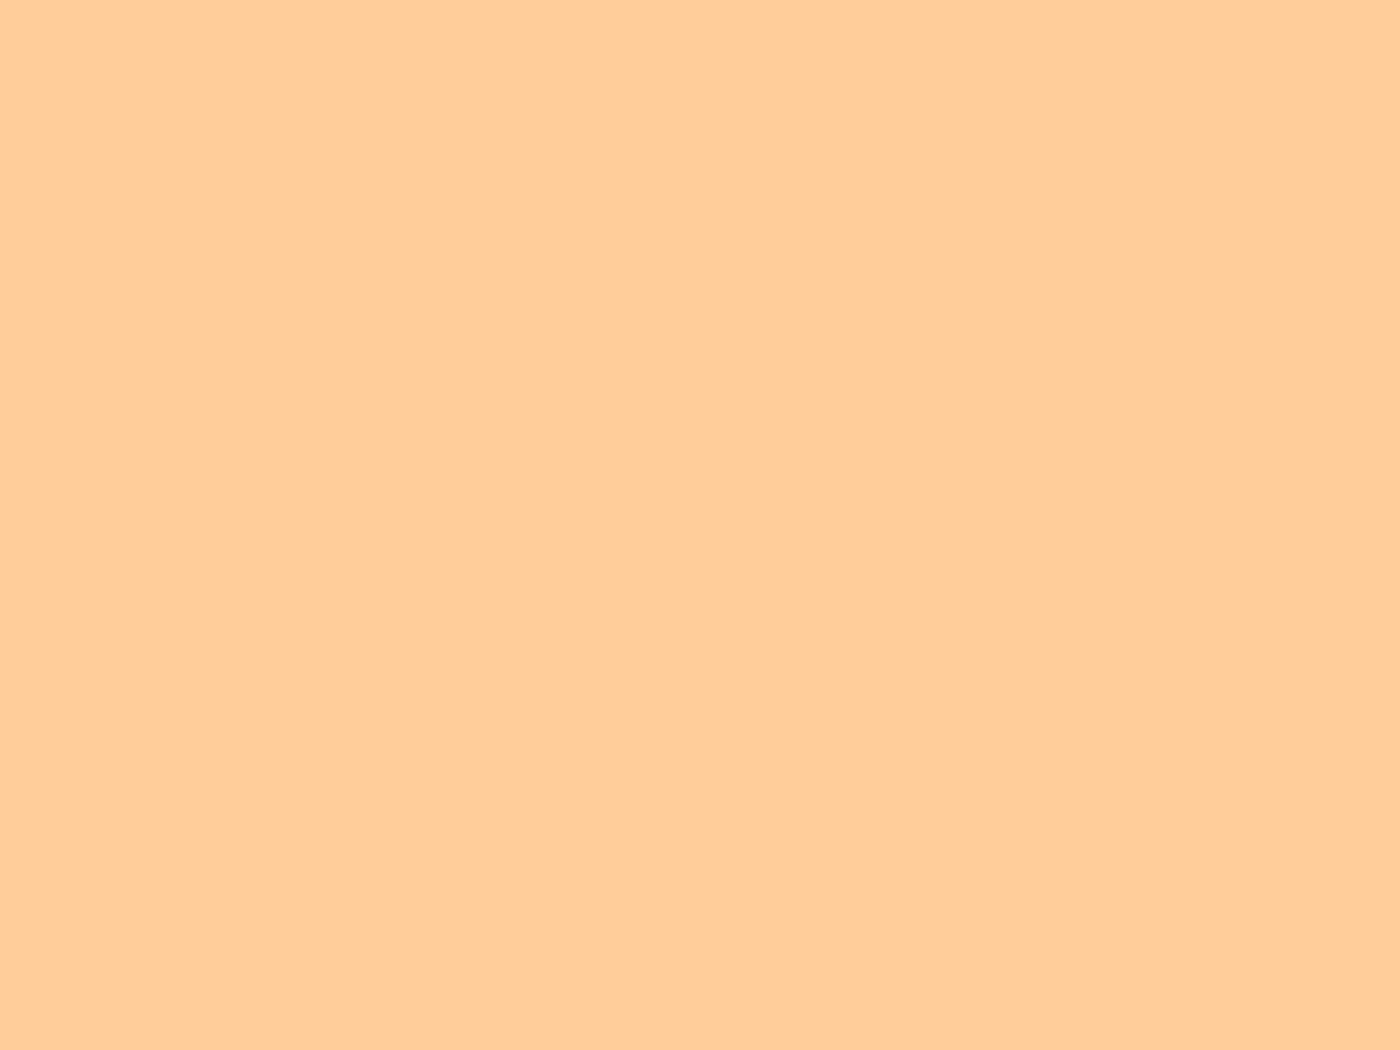 Free 1400x1050 resolution Peach orange solid color background view